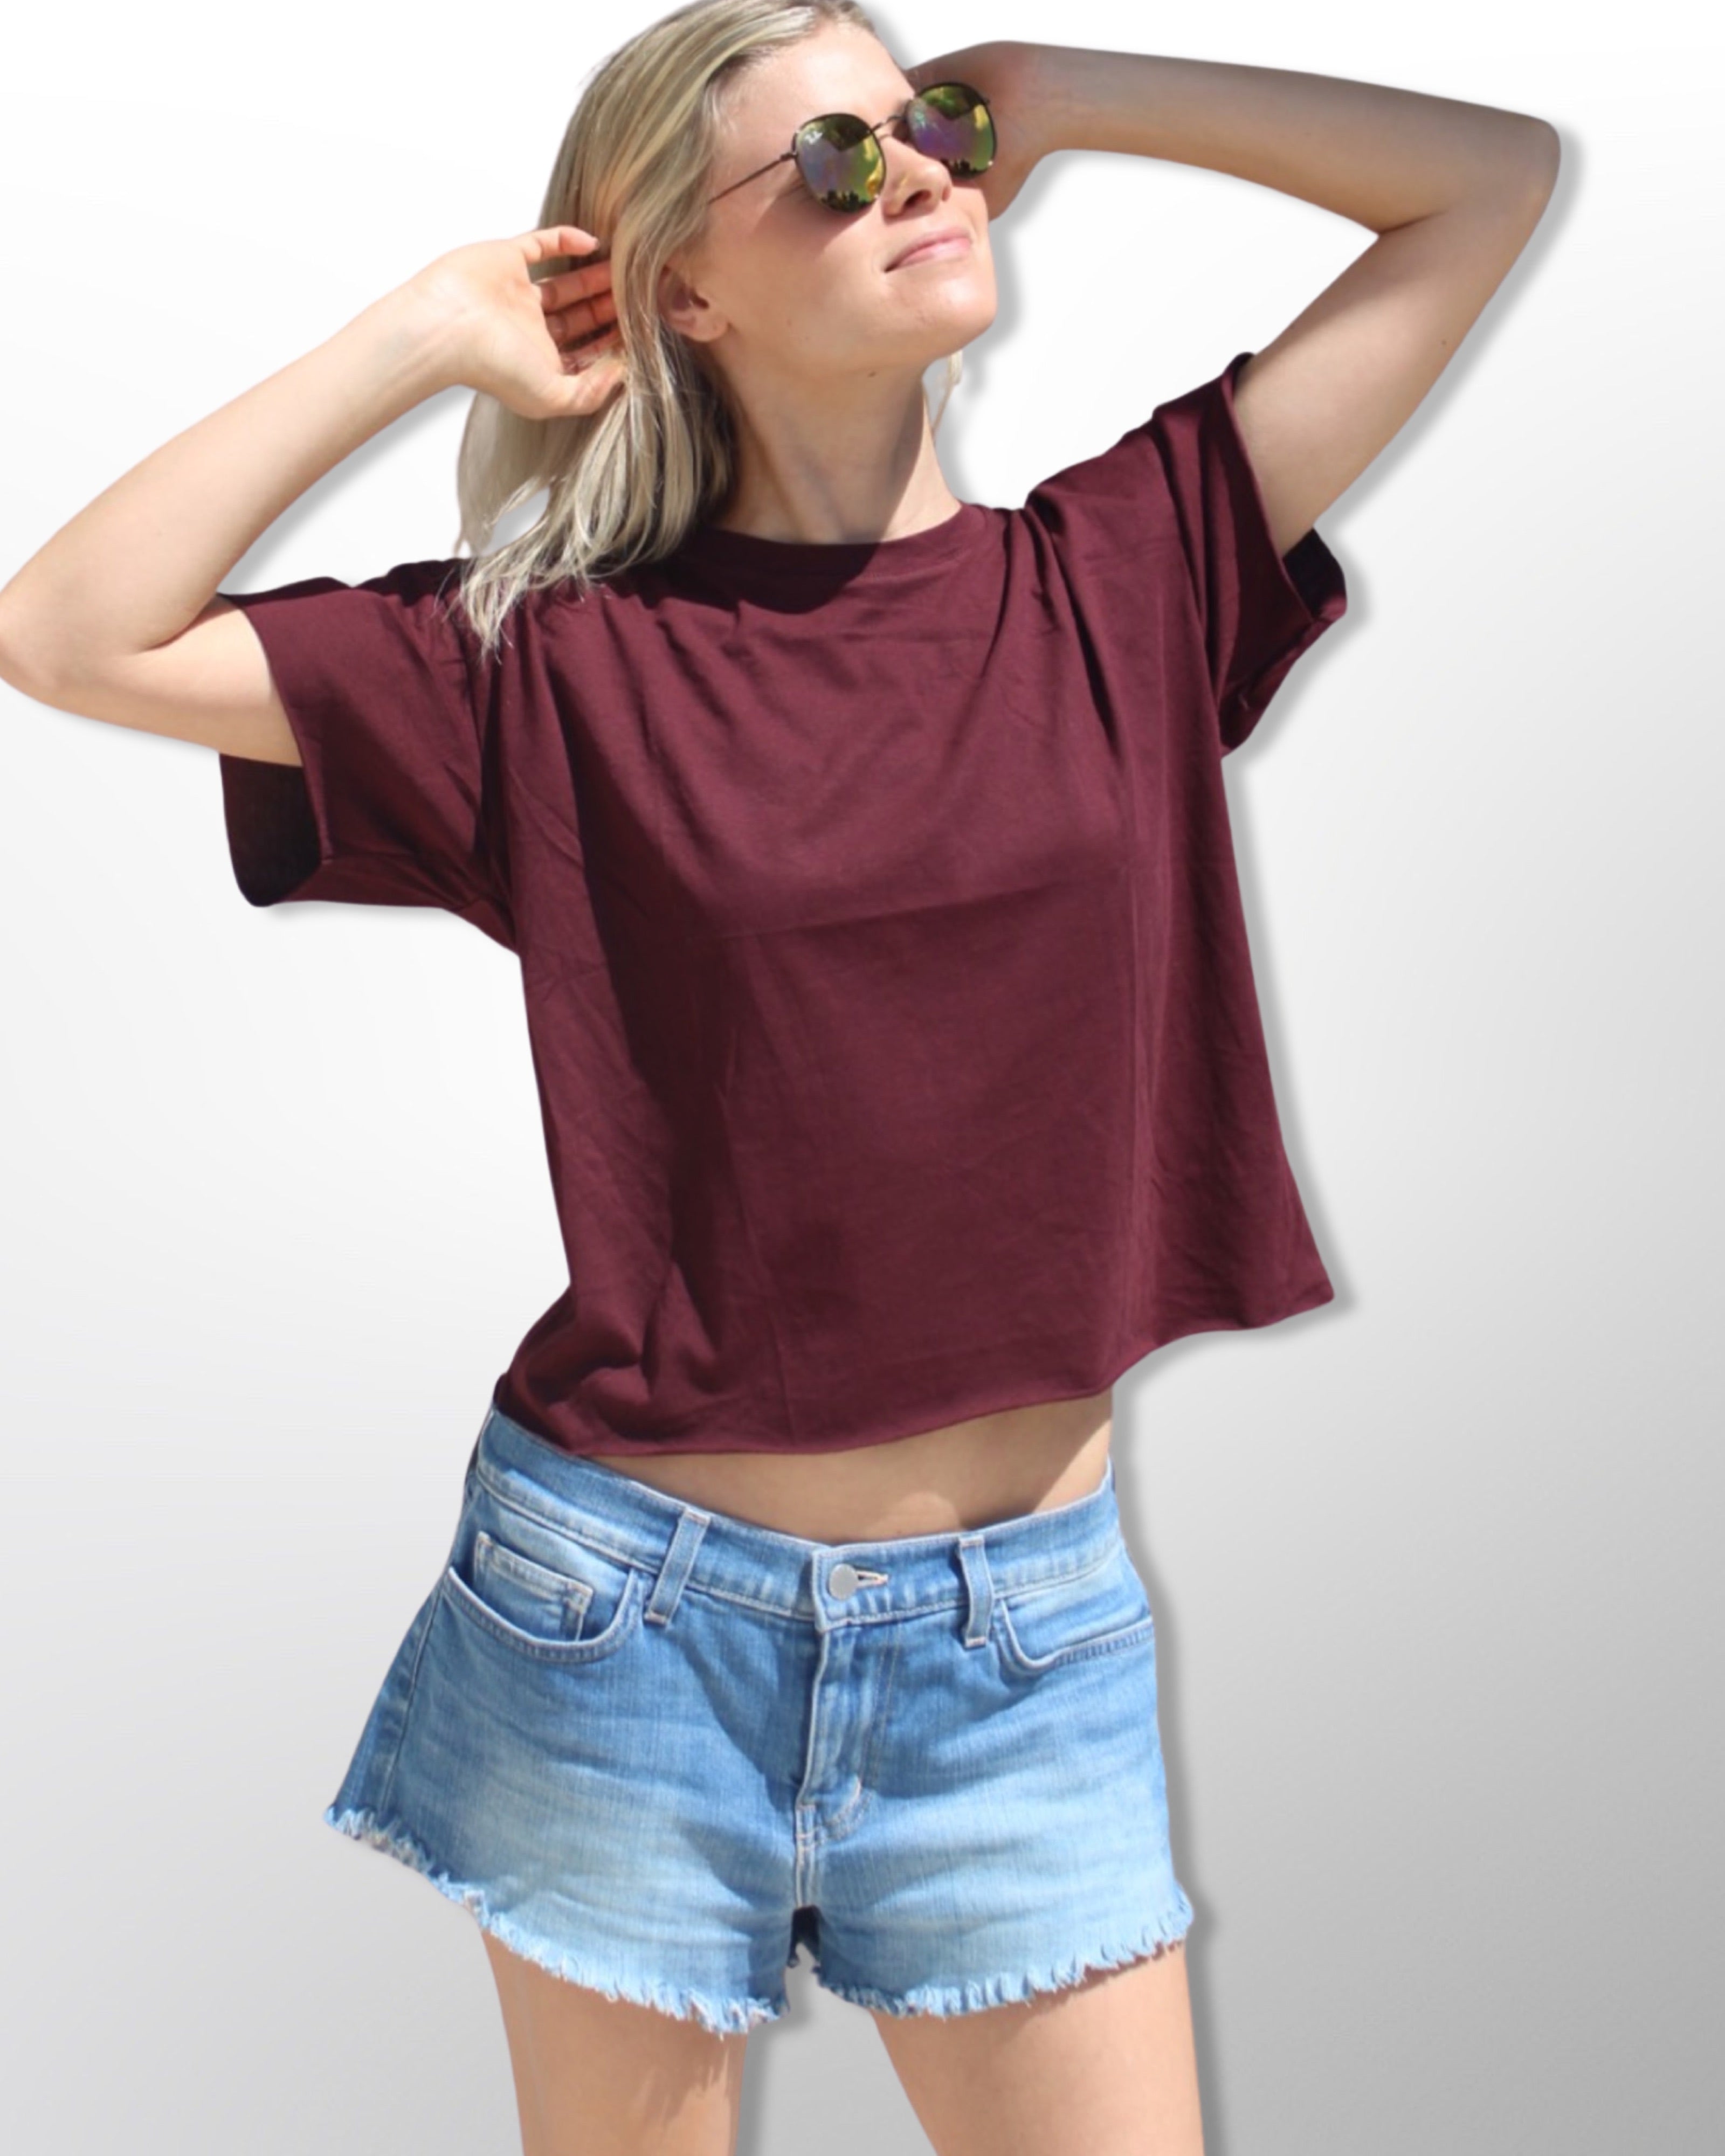 Our Comfy Crop Tees are Super Cute with Boxy Fit Made from Super Soft Cotton , with a Lived in Wash . They are Light and Breezy , Sits right Below The Waist and are Oh So Comfy . Say Hello to Your New Basic Tee with The Perfect Fit ! 100% Cotton Machine Wash Designed in California Made in USA